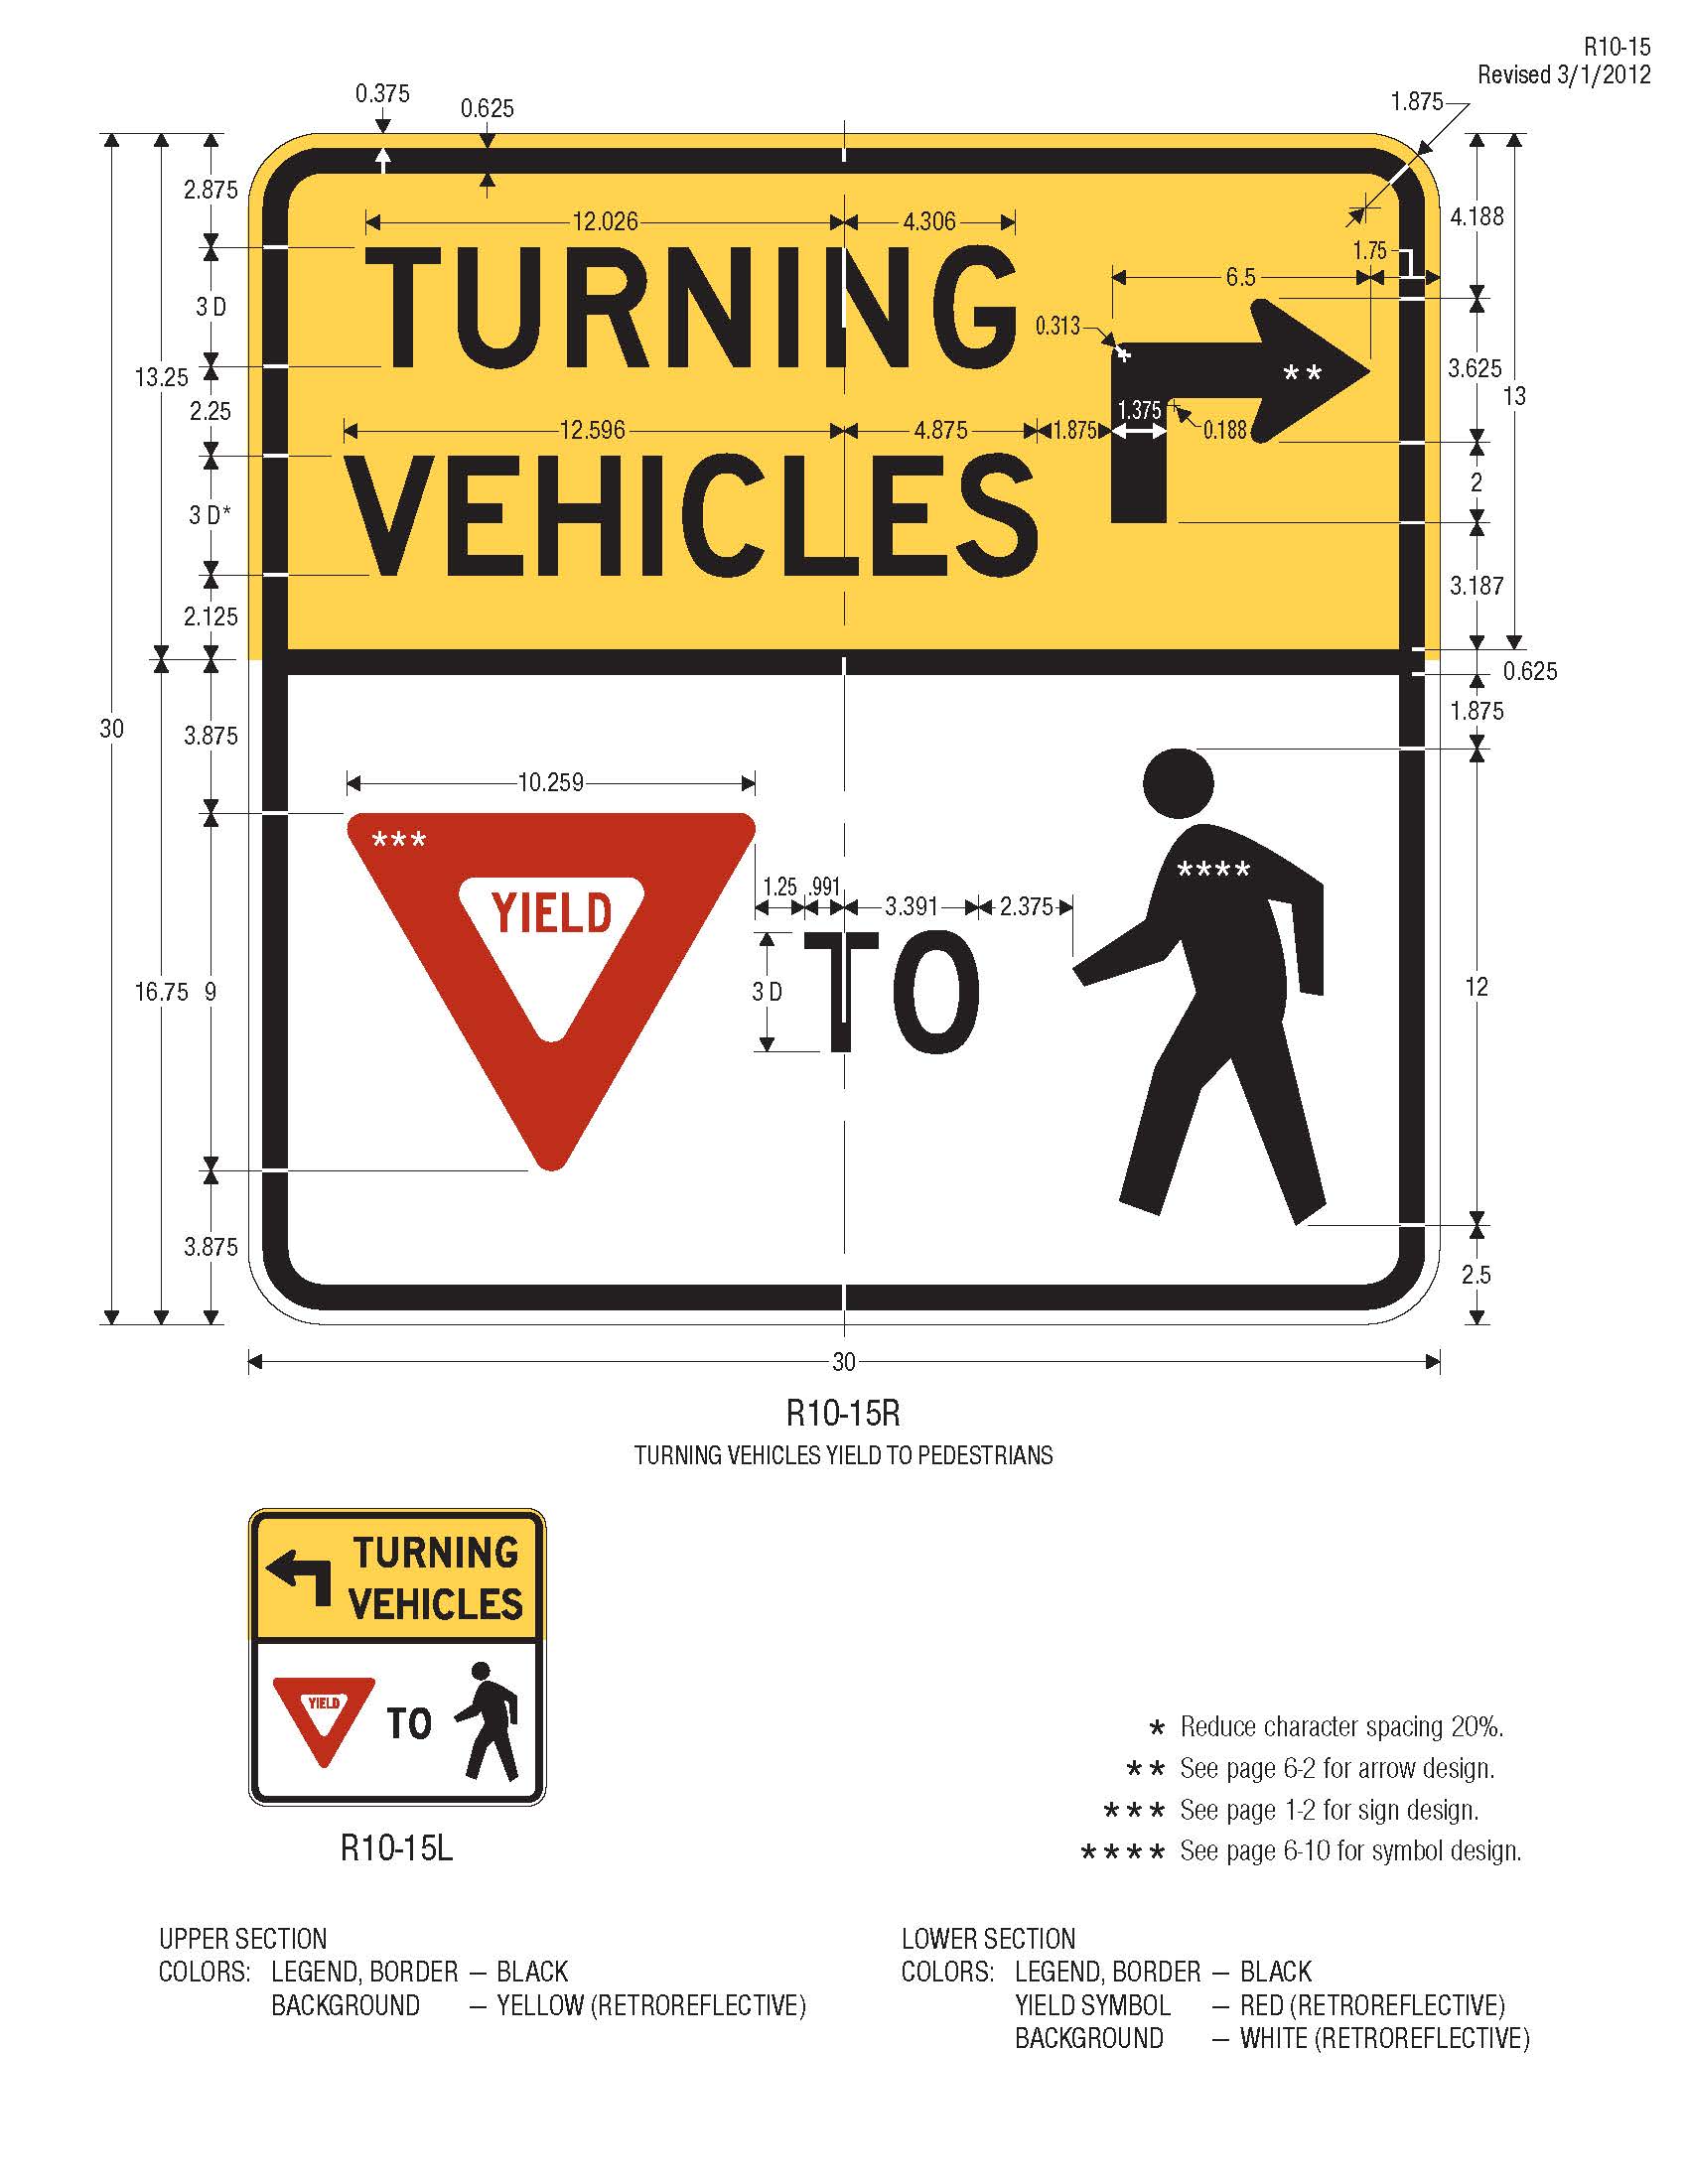 Regulatory Road And Traffic Signs Worksafe Traffic Control